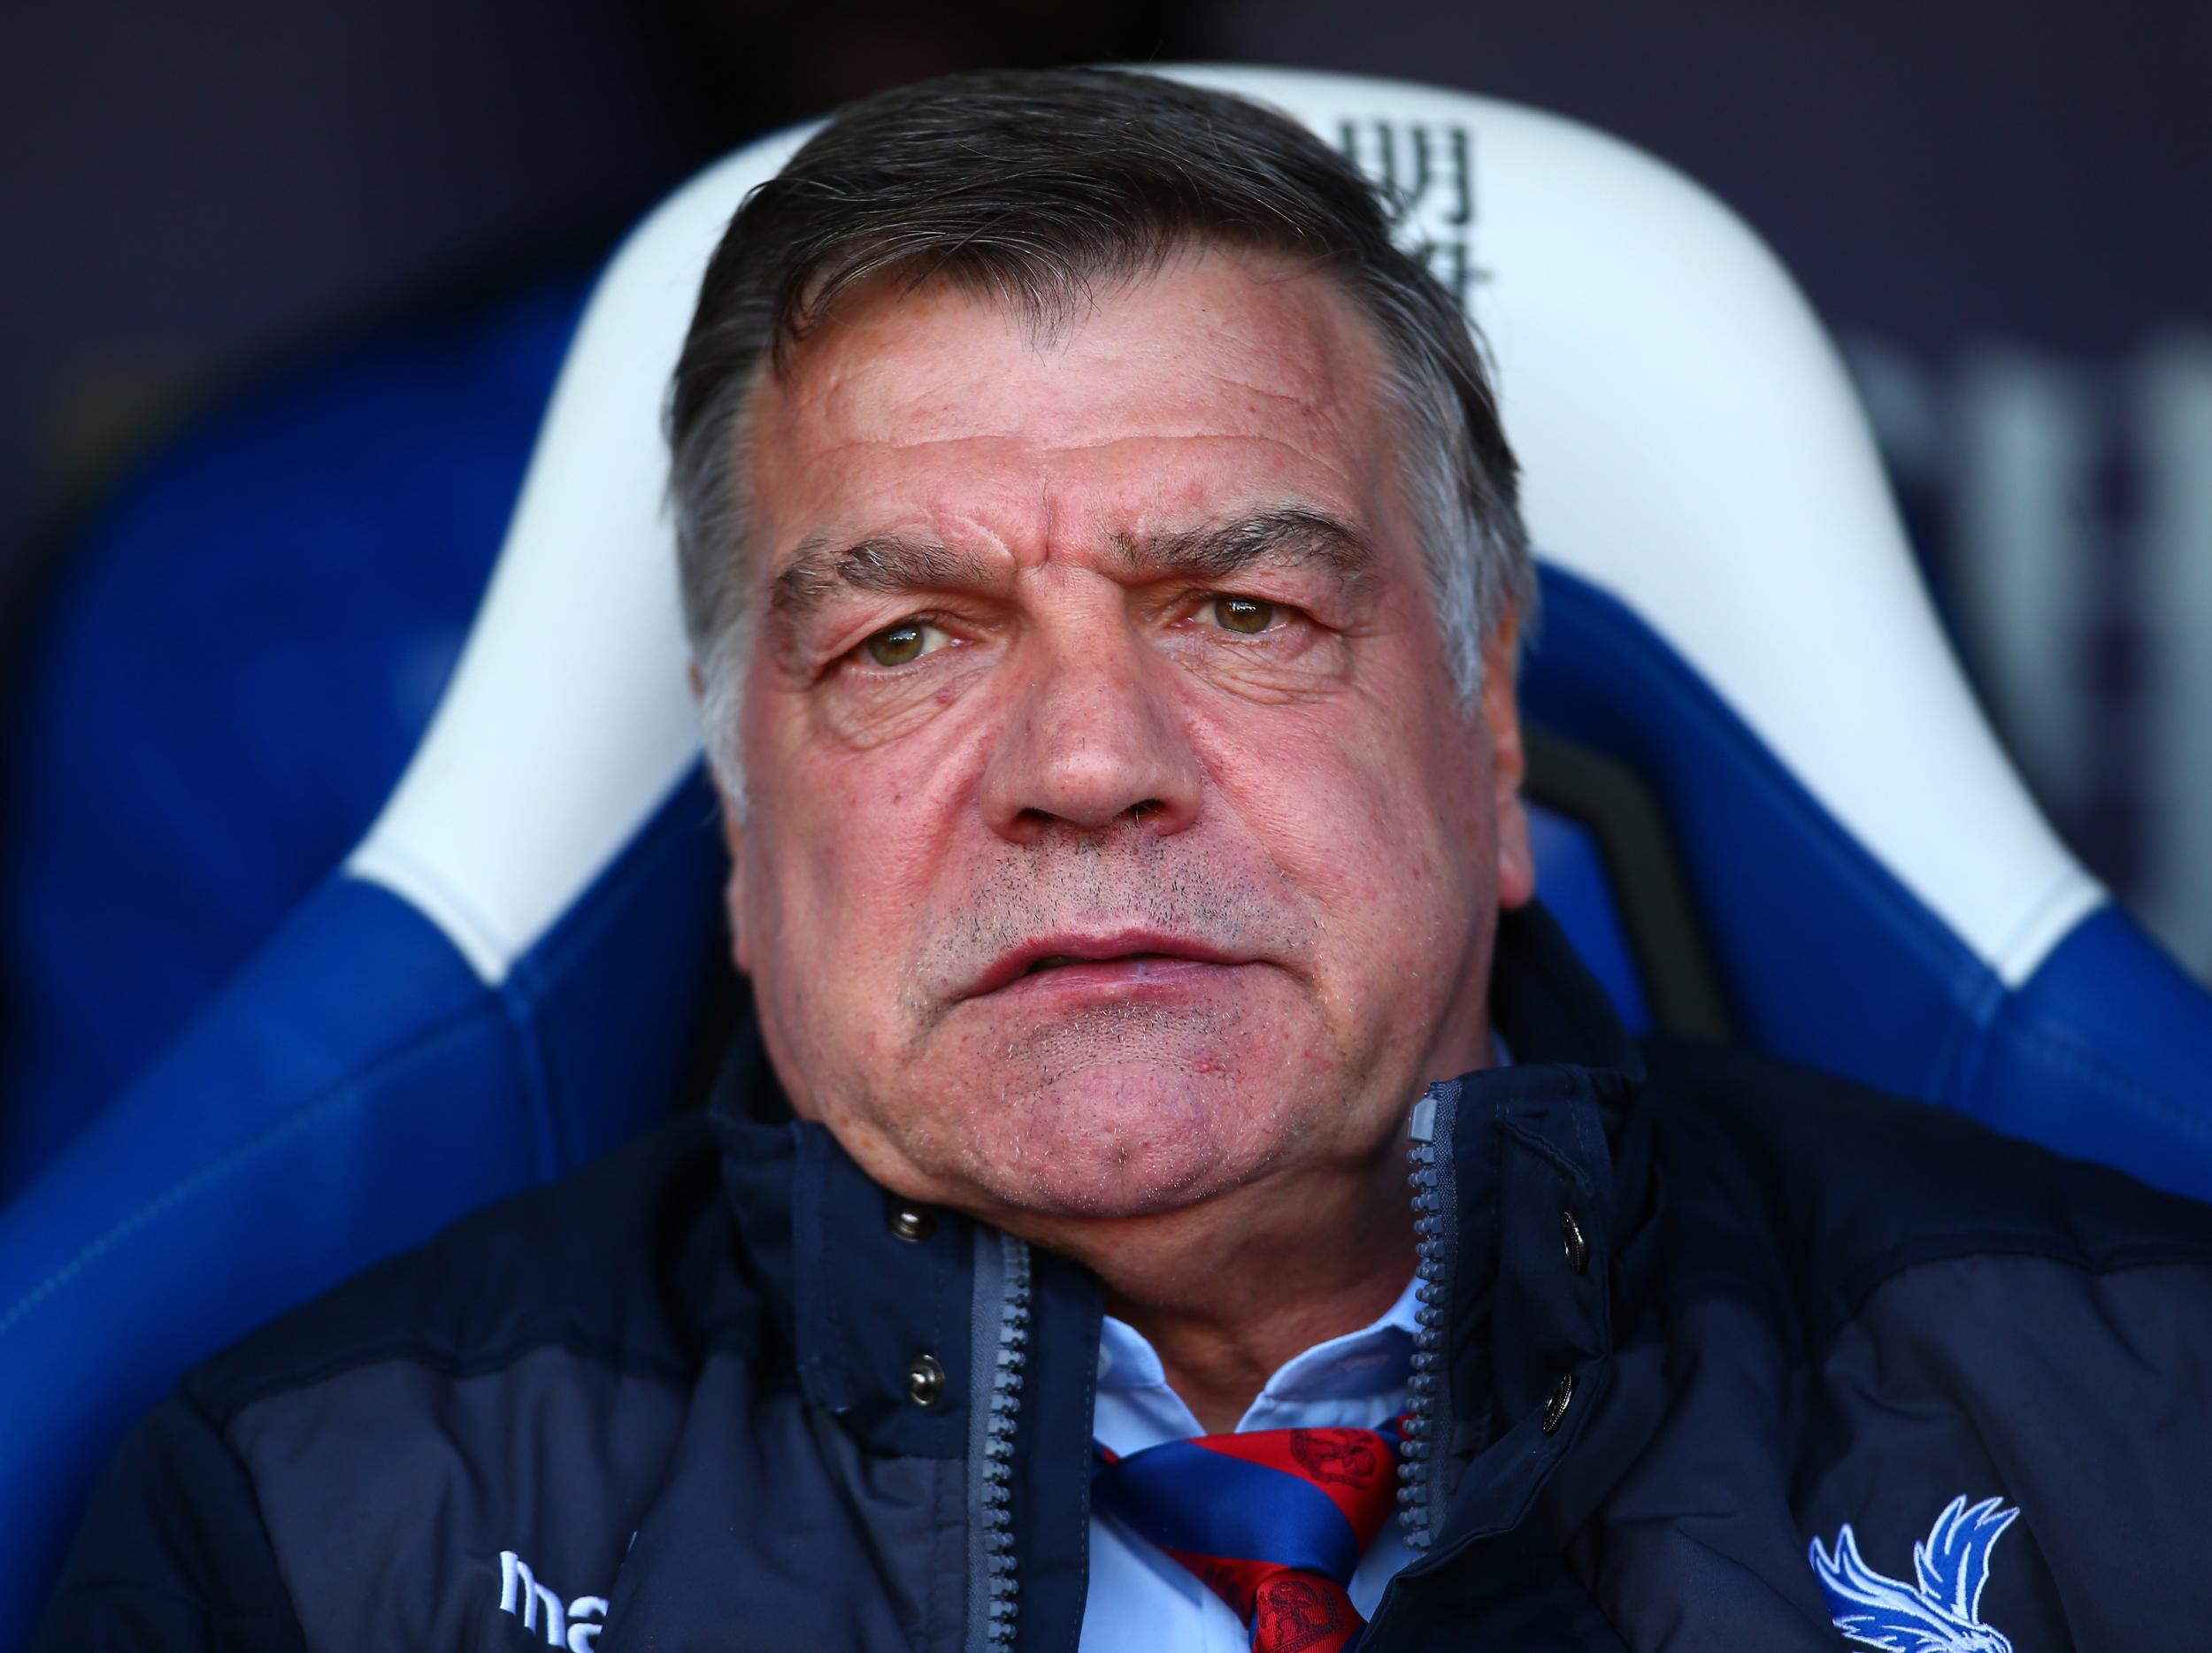 Allardyce has steered Palace away from the relegation zone